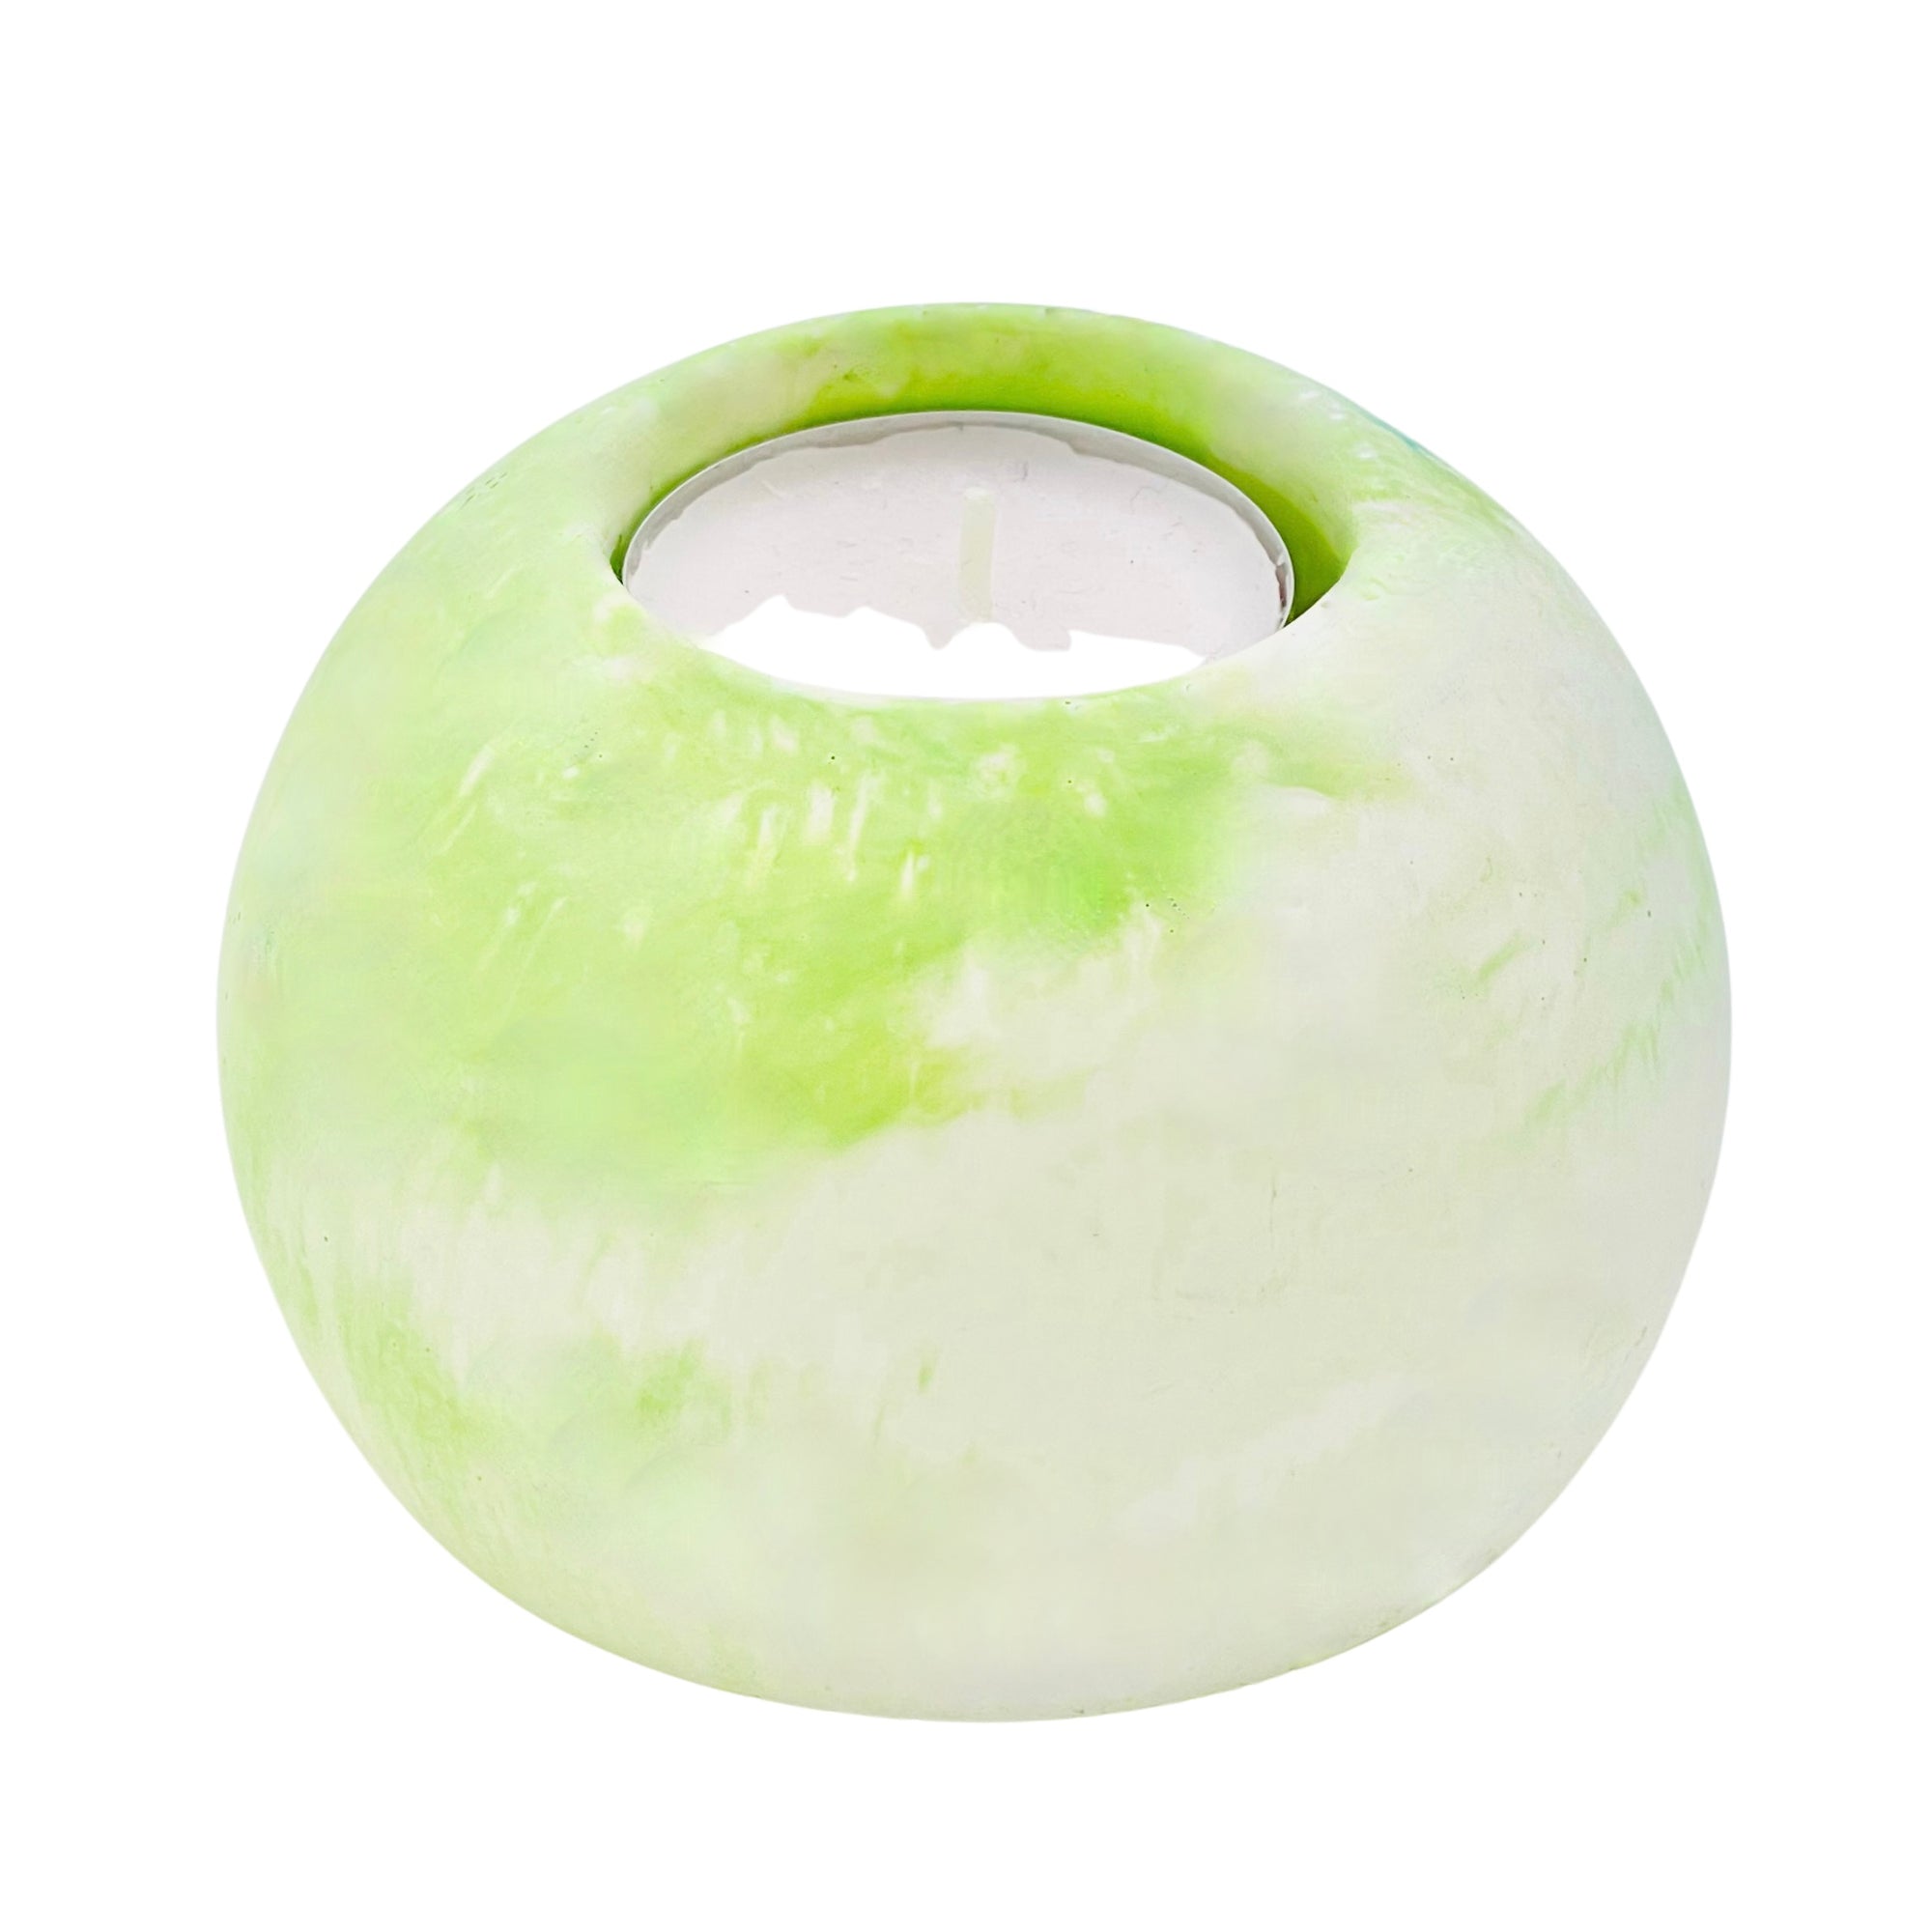 A solid Jesmonite spherical tealight holder measuring 9.2cm in diameter marbled with lime green pigment.